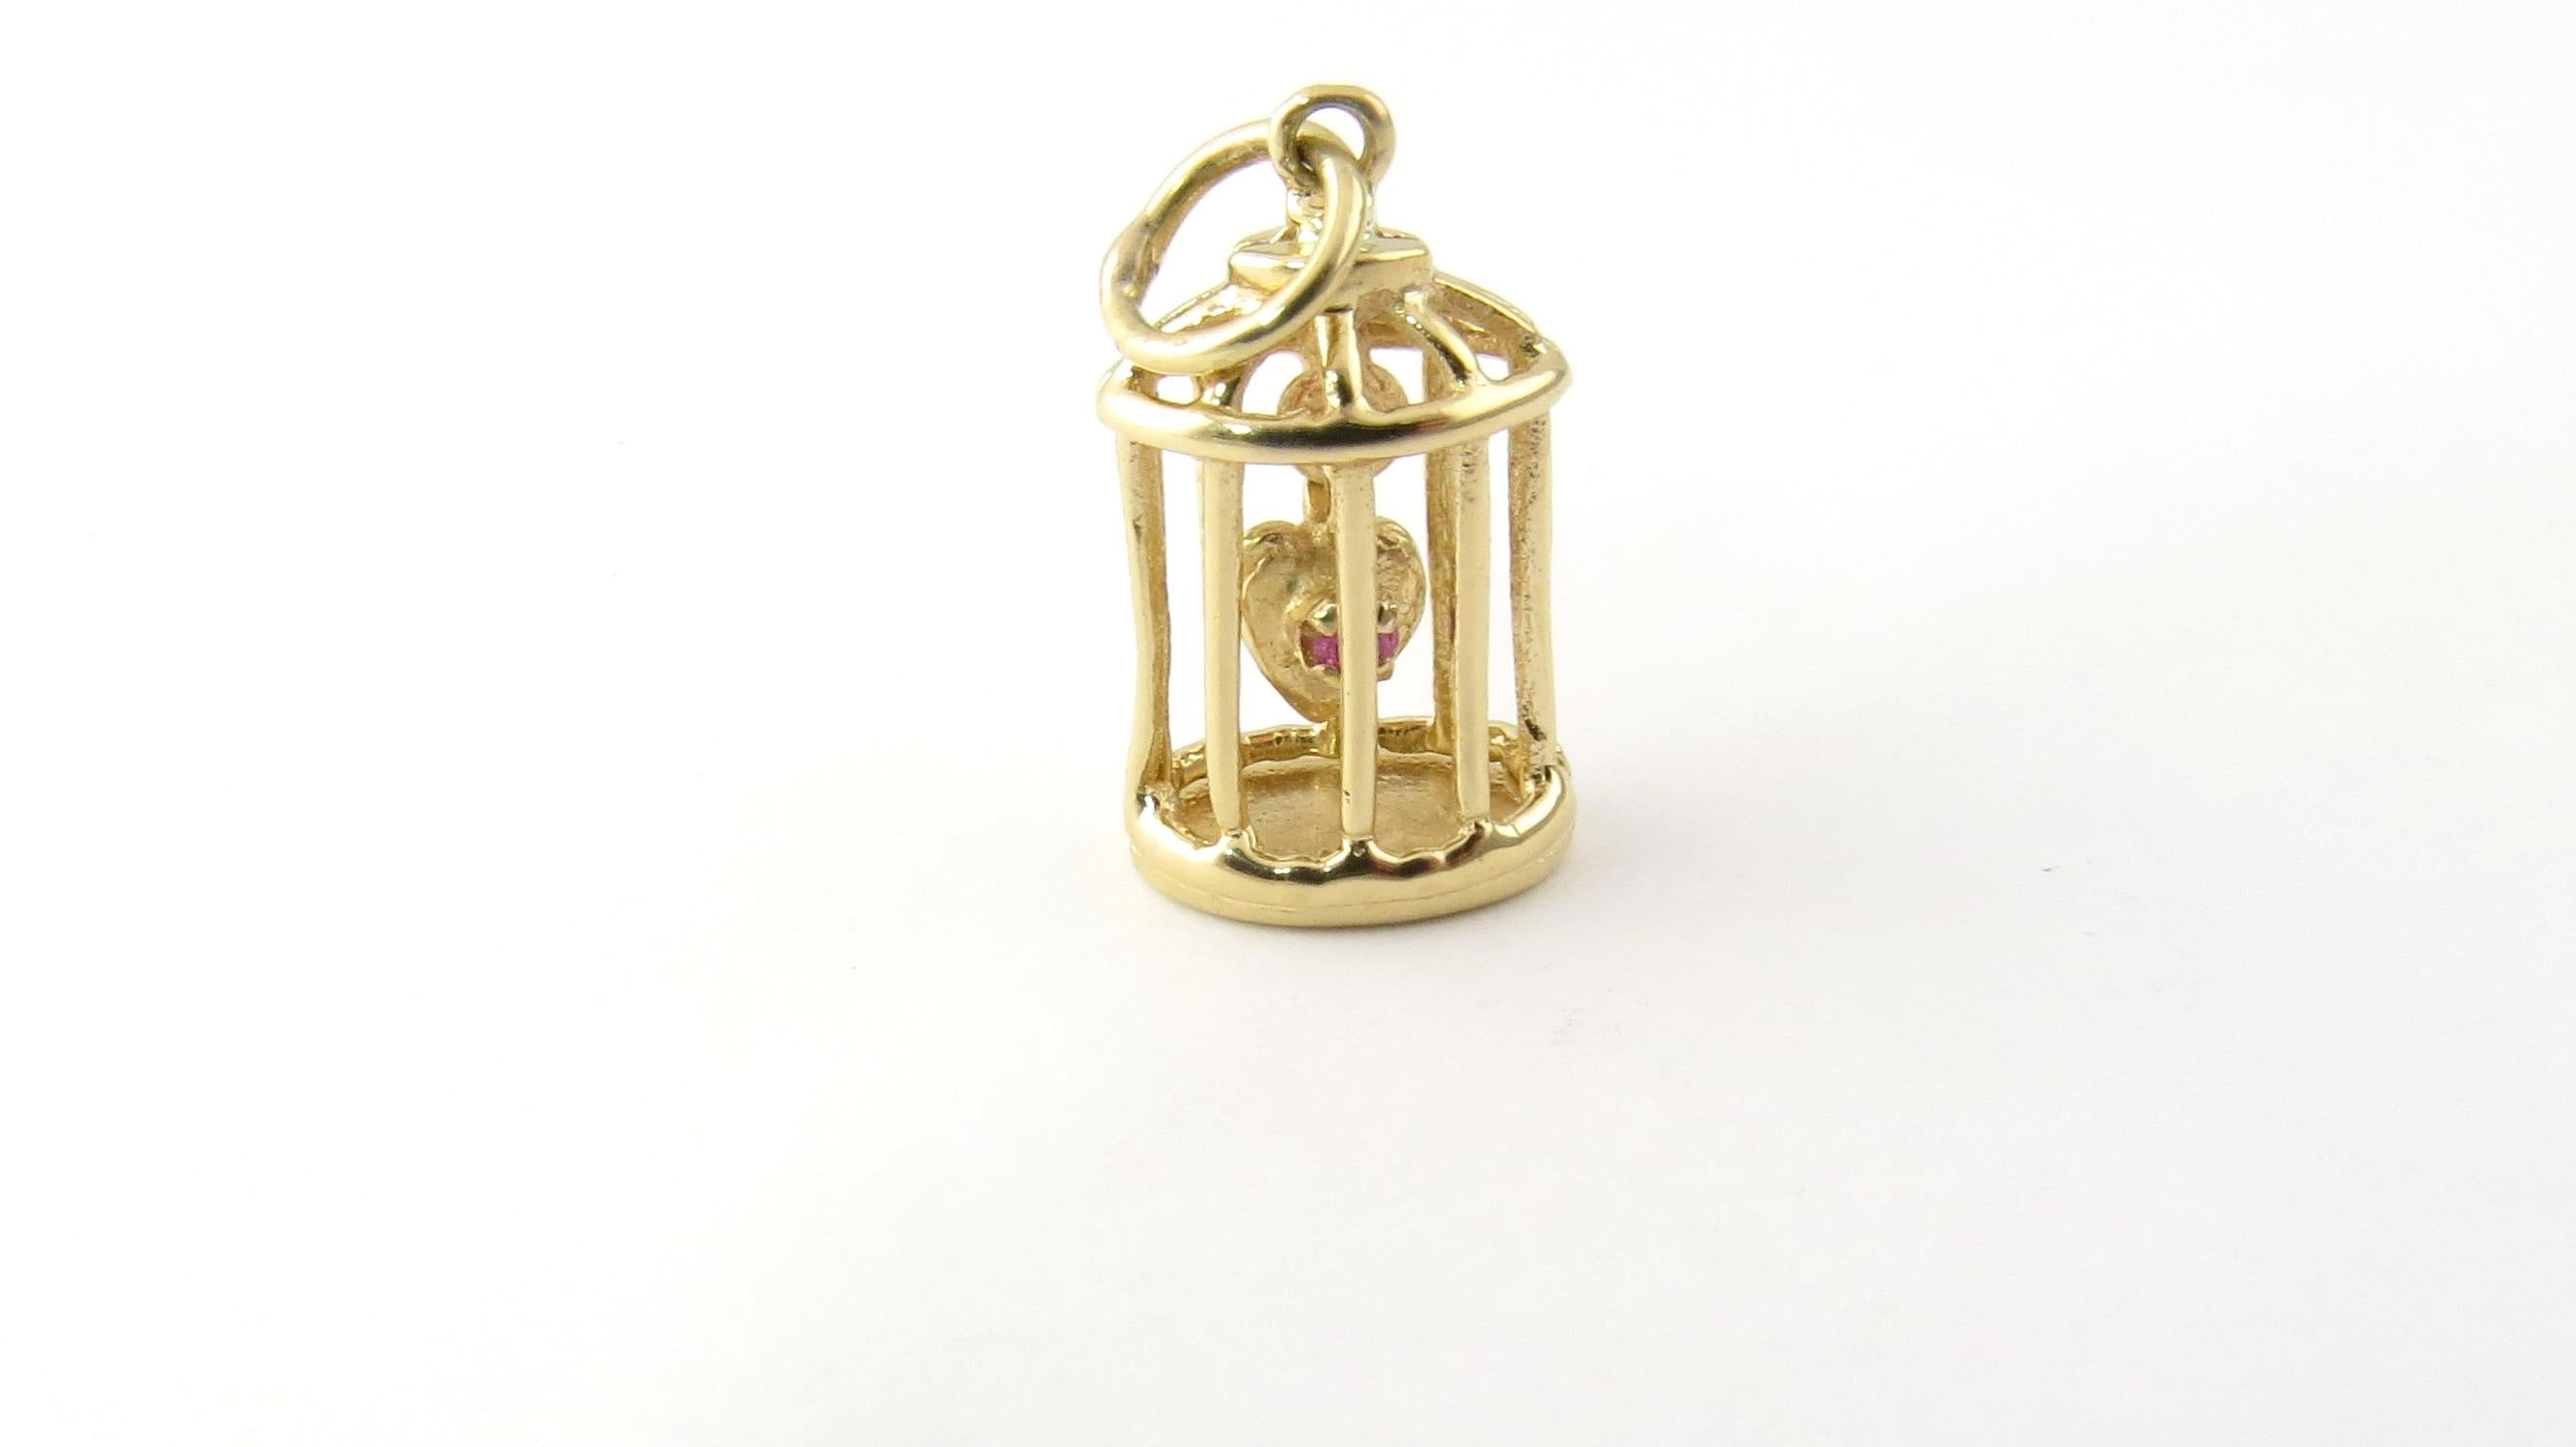 Vintage 14 Karat Yellow Gold Caged Heart Charm.

This delightful 3D charm features a miniature cage and dangling heart accented with a lovely red gemstone. Beautifully detailed in 14K yellow gold.

Size: 20 mm x 12 mm (actual charm)

Weight: 1.9